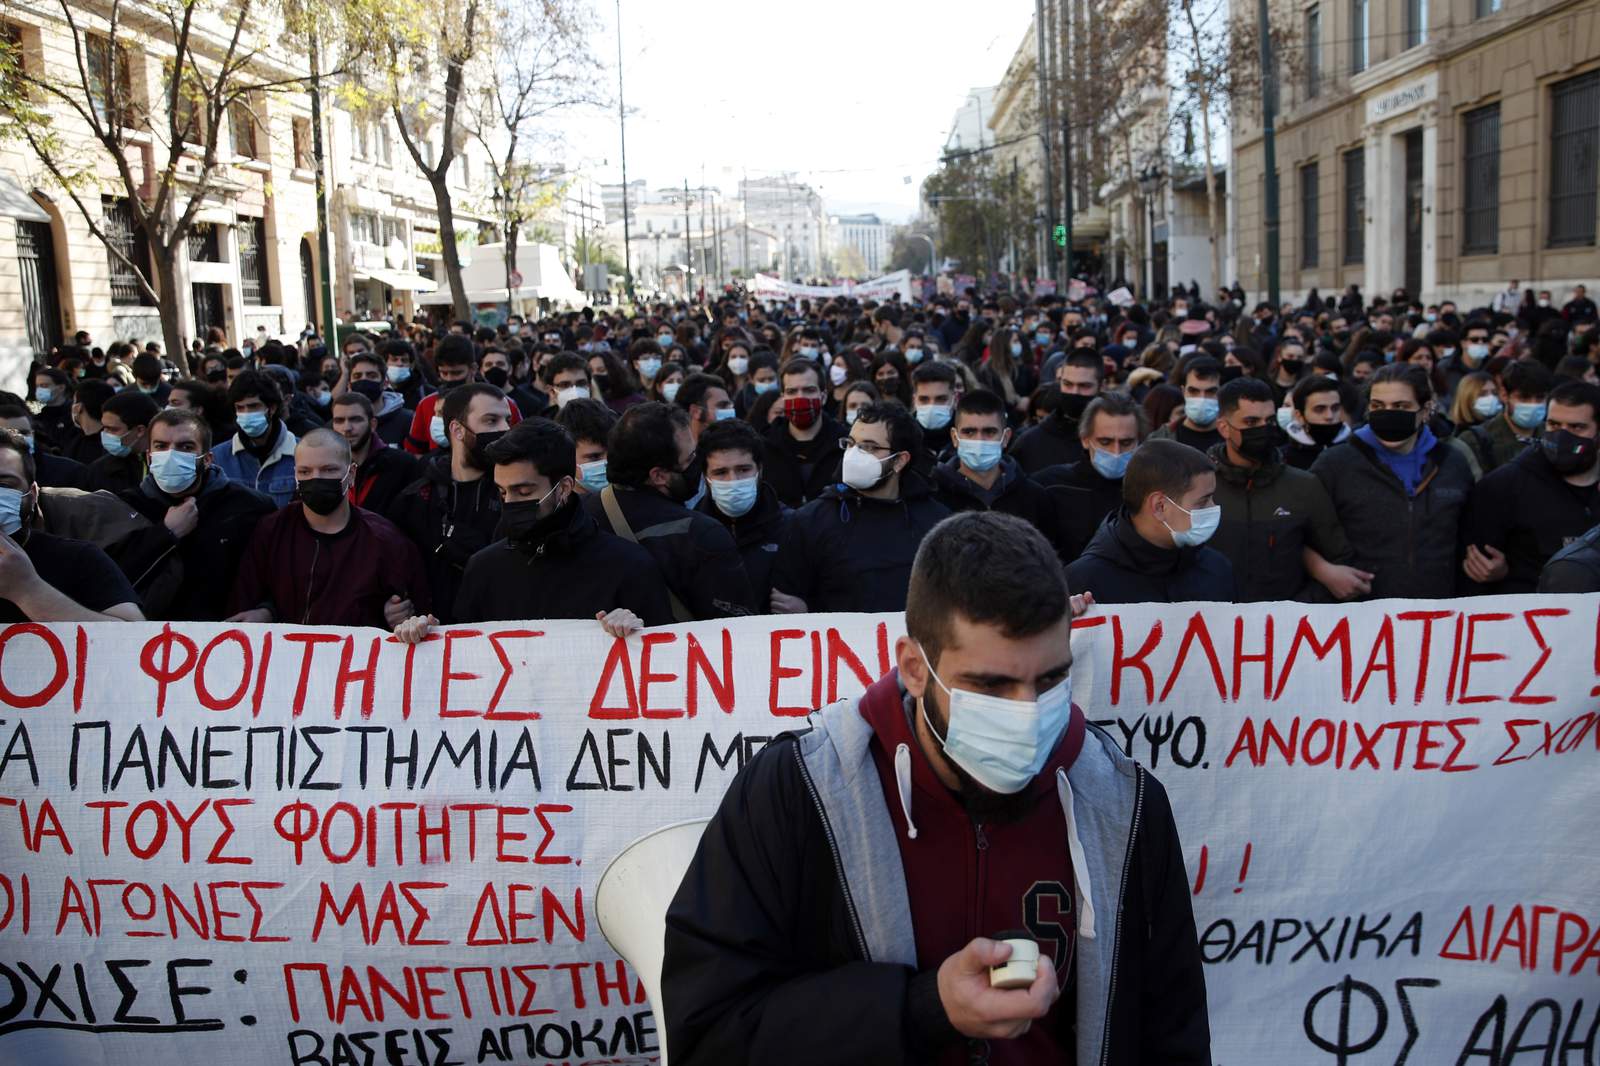 Citing pandemic, Greece bans protests for a week